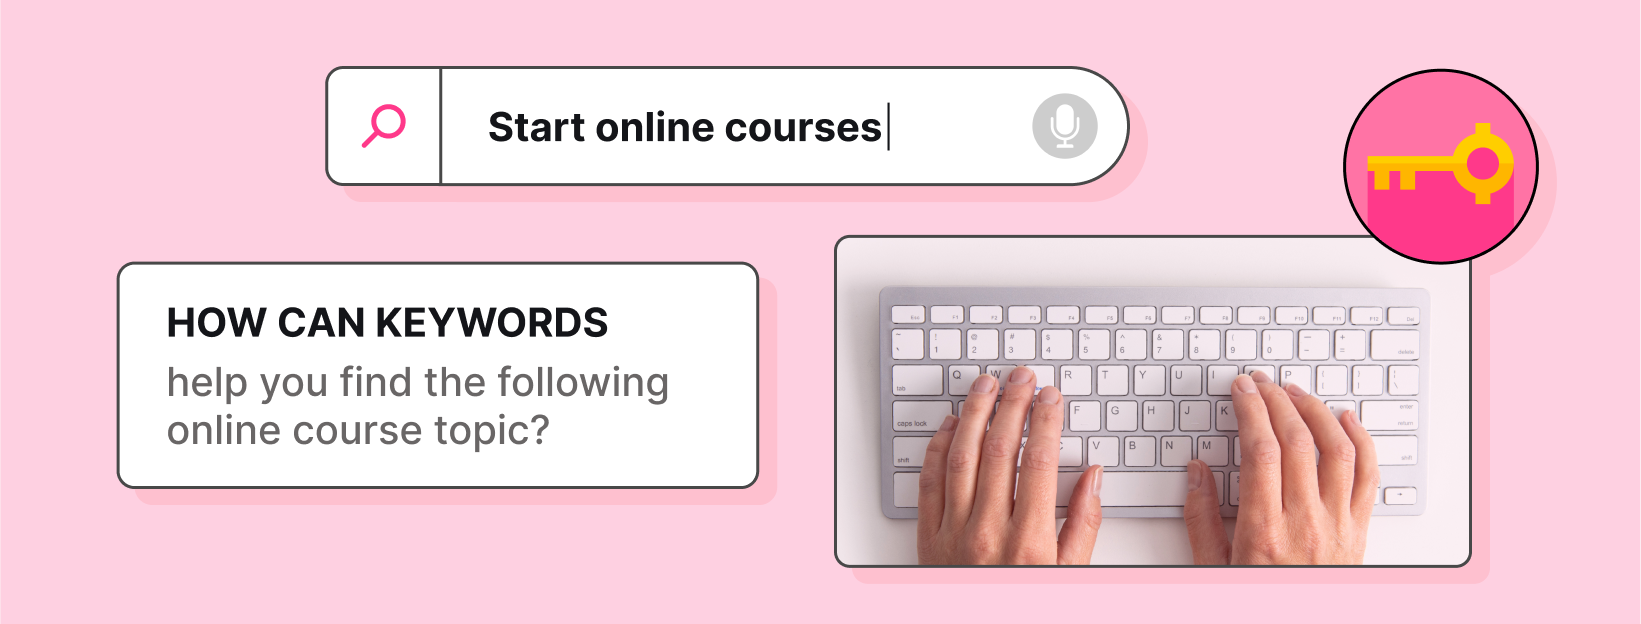 How can keywords help you find the following online course topic?